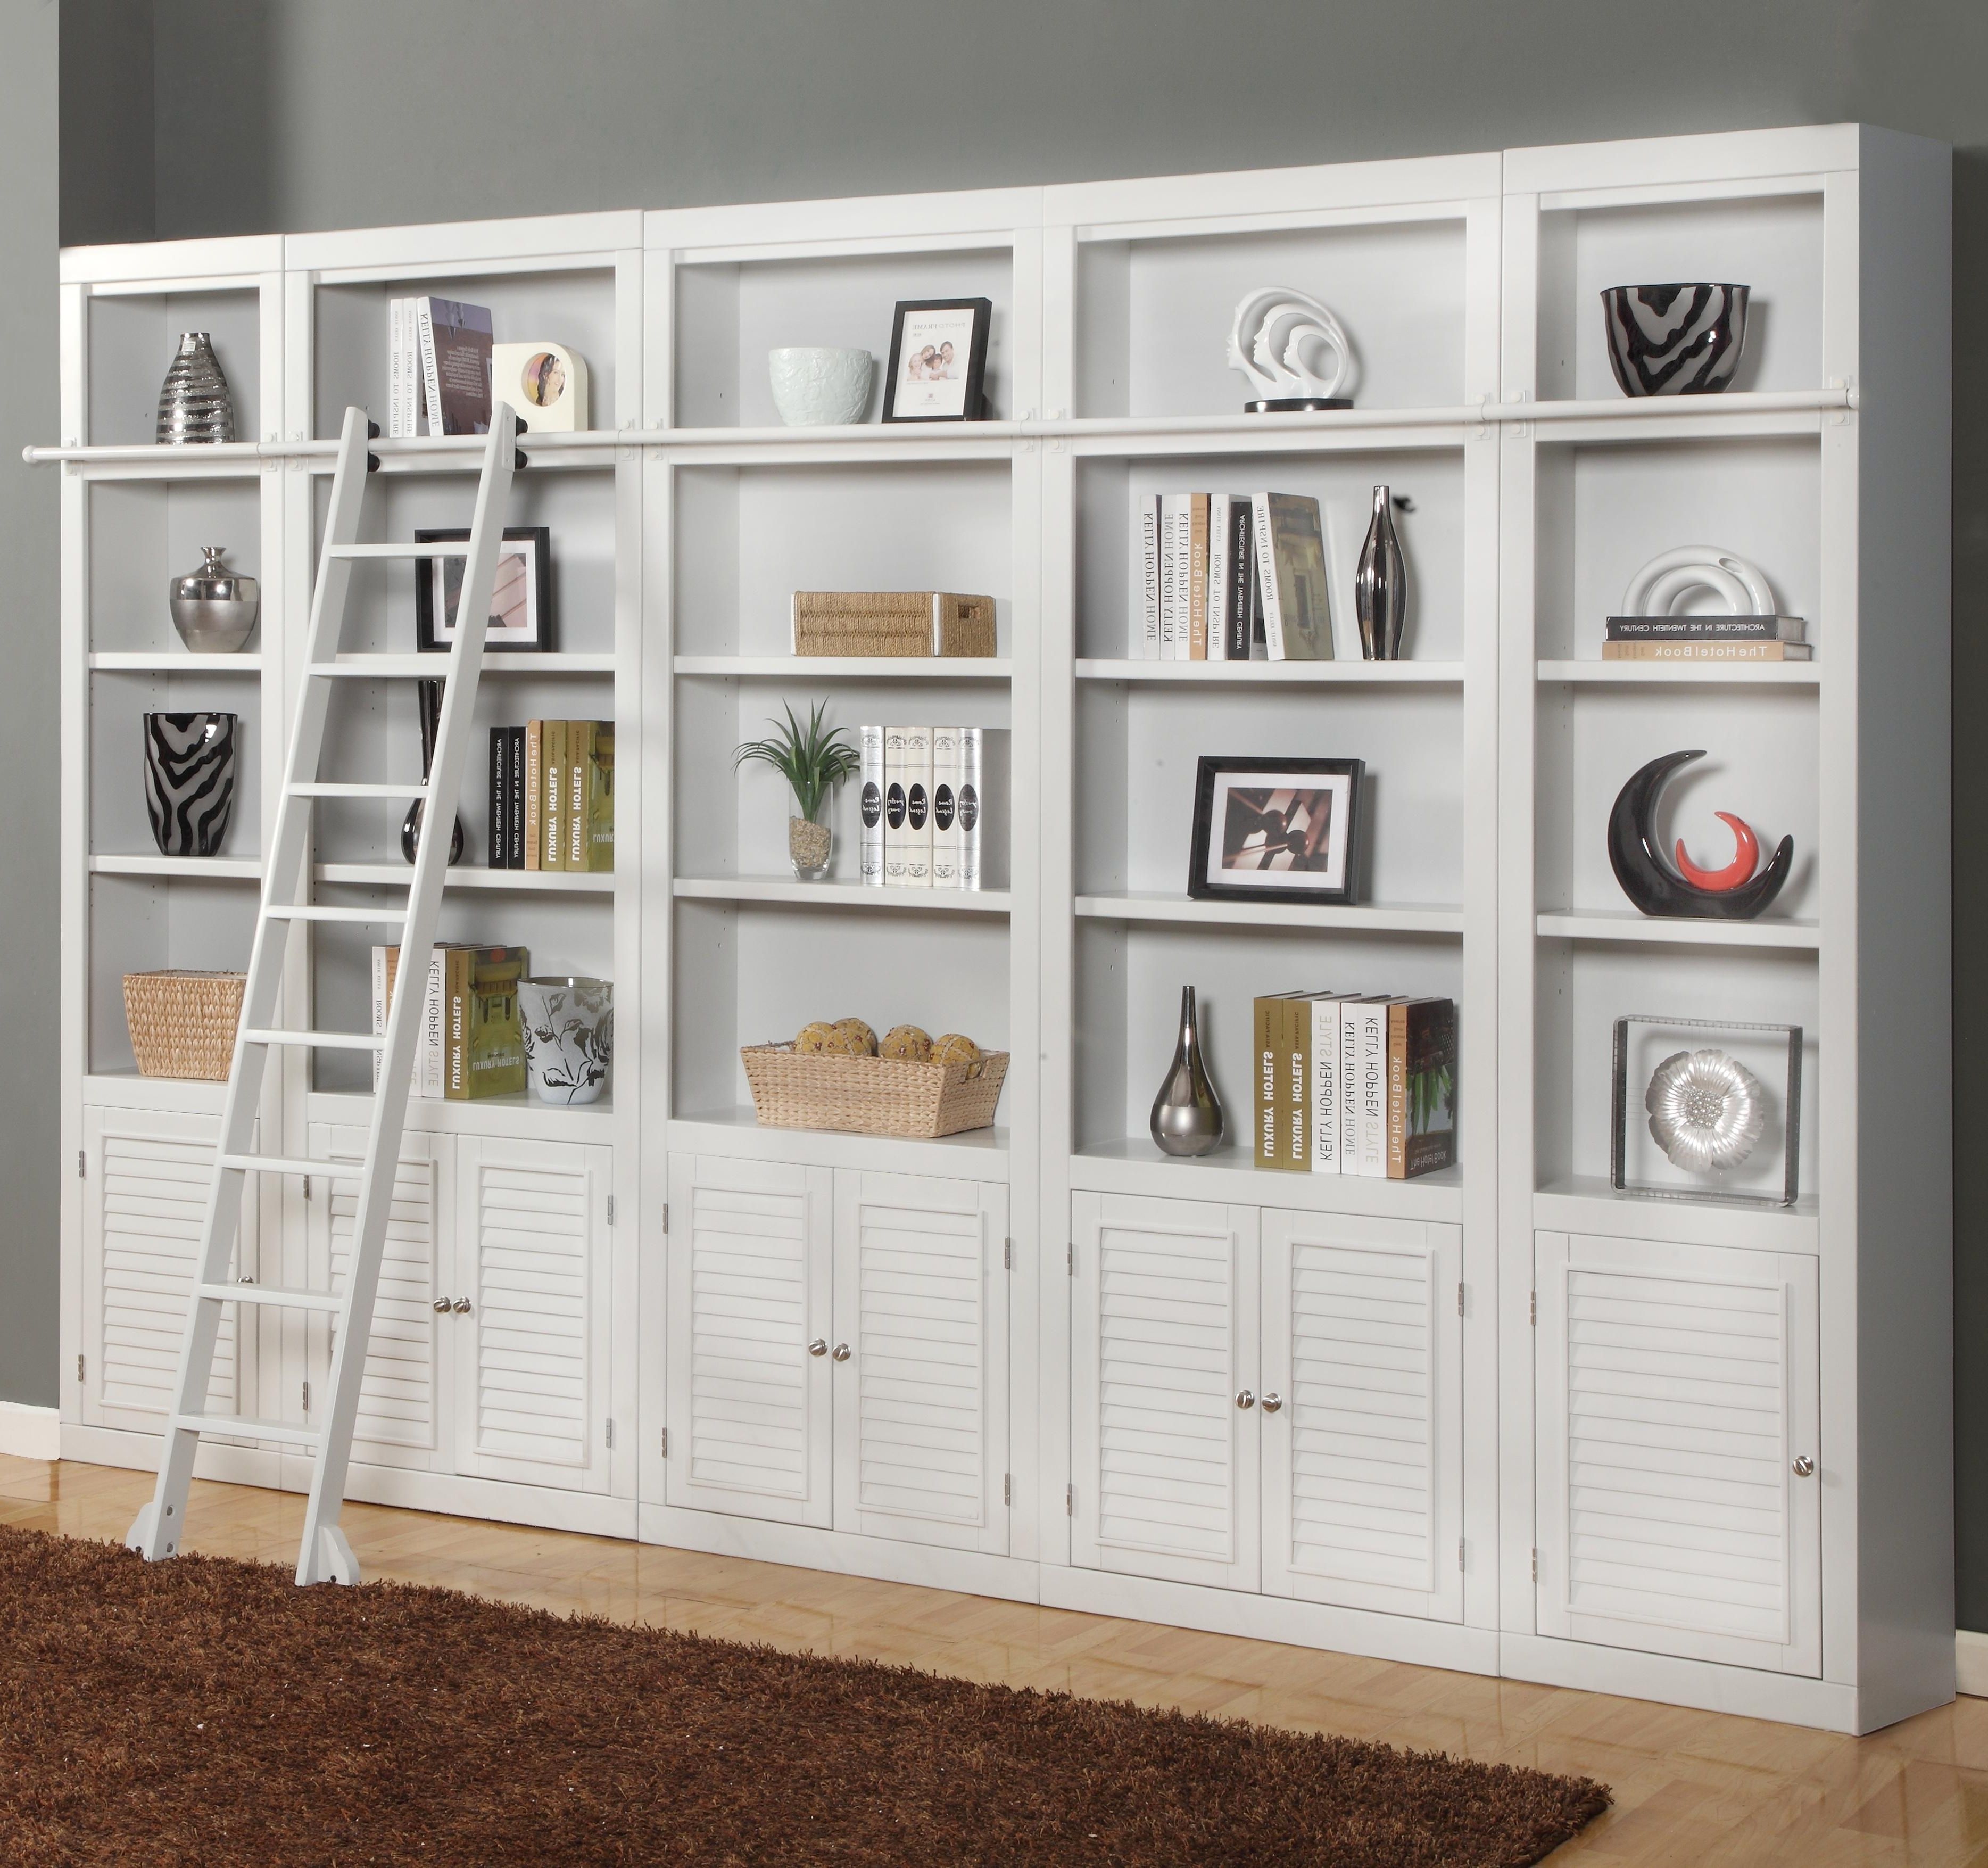 Well Liked Wall Library Bookcases Throughout Bookshelf: Stunning Bookcase Wall Unit Walmart Bookshelves (View 7 of 15)